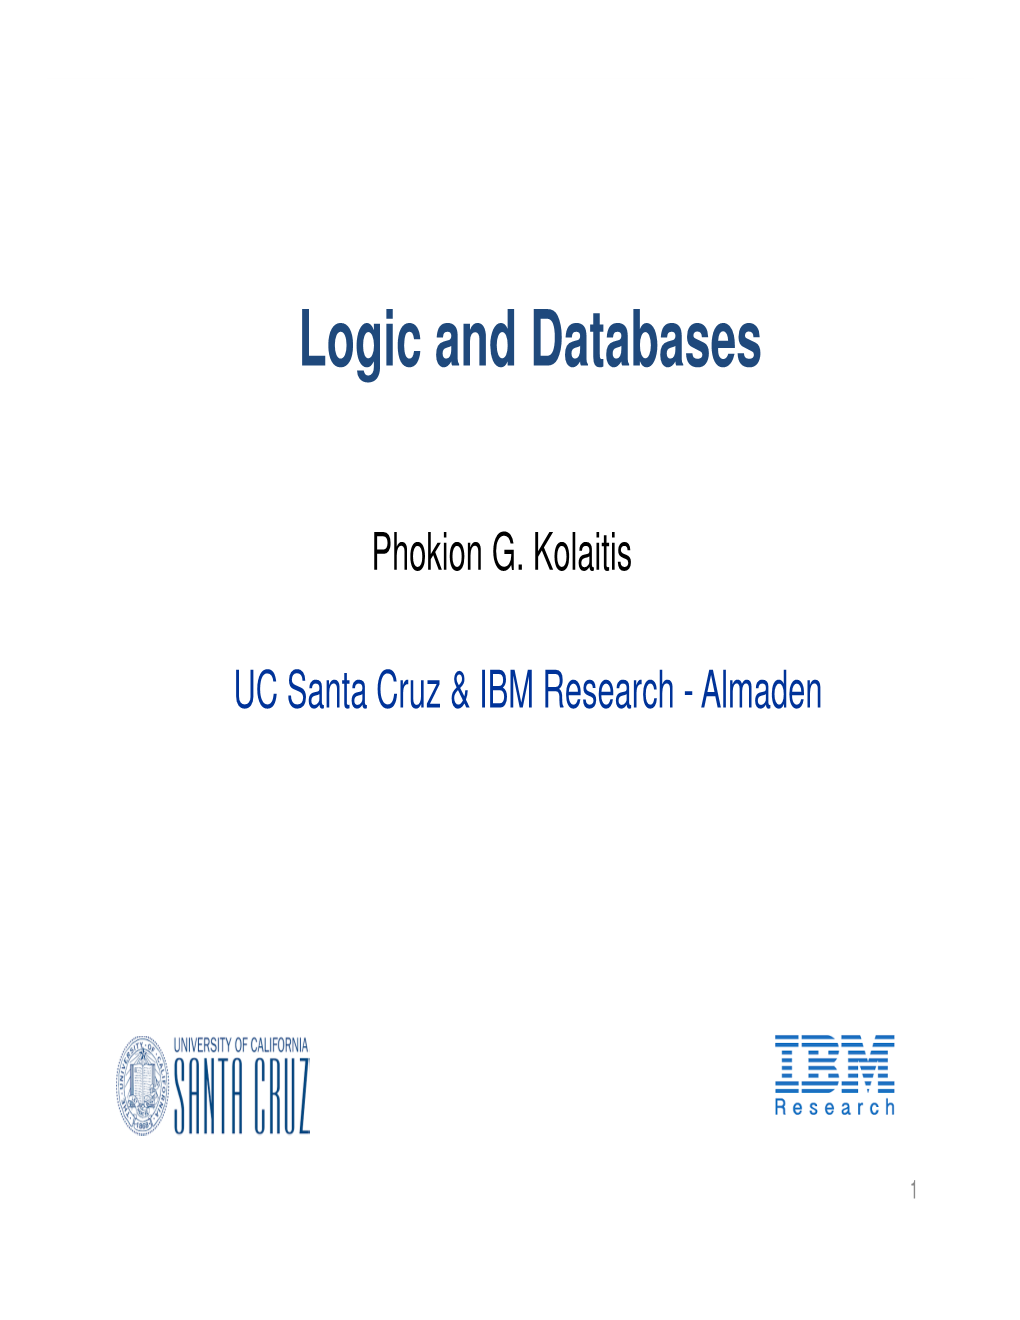 Logic and Databases